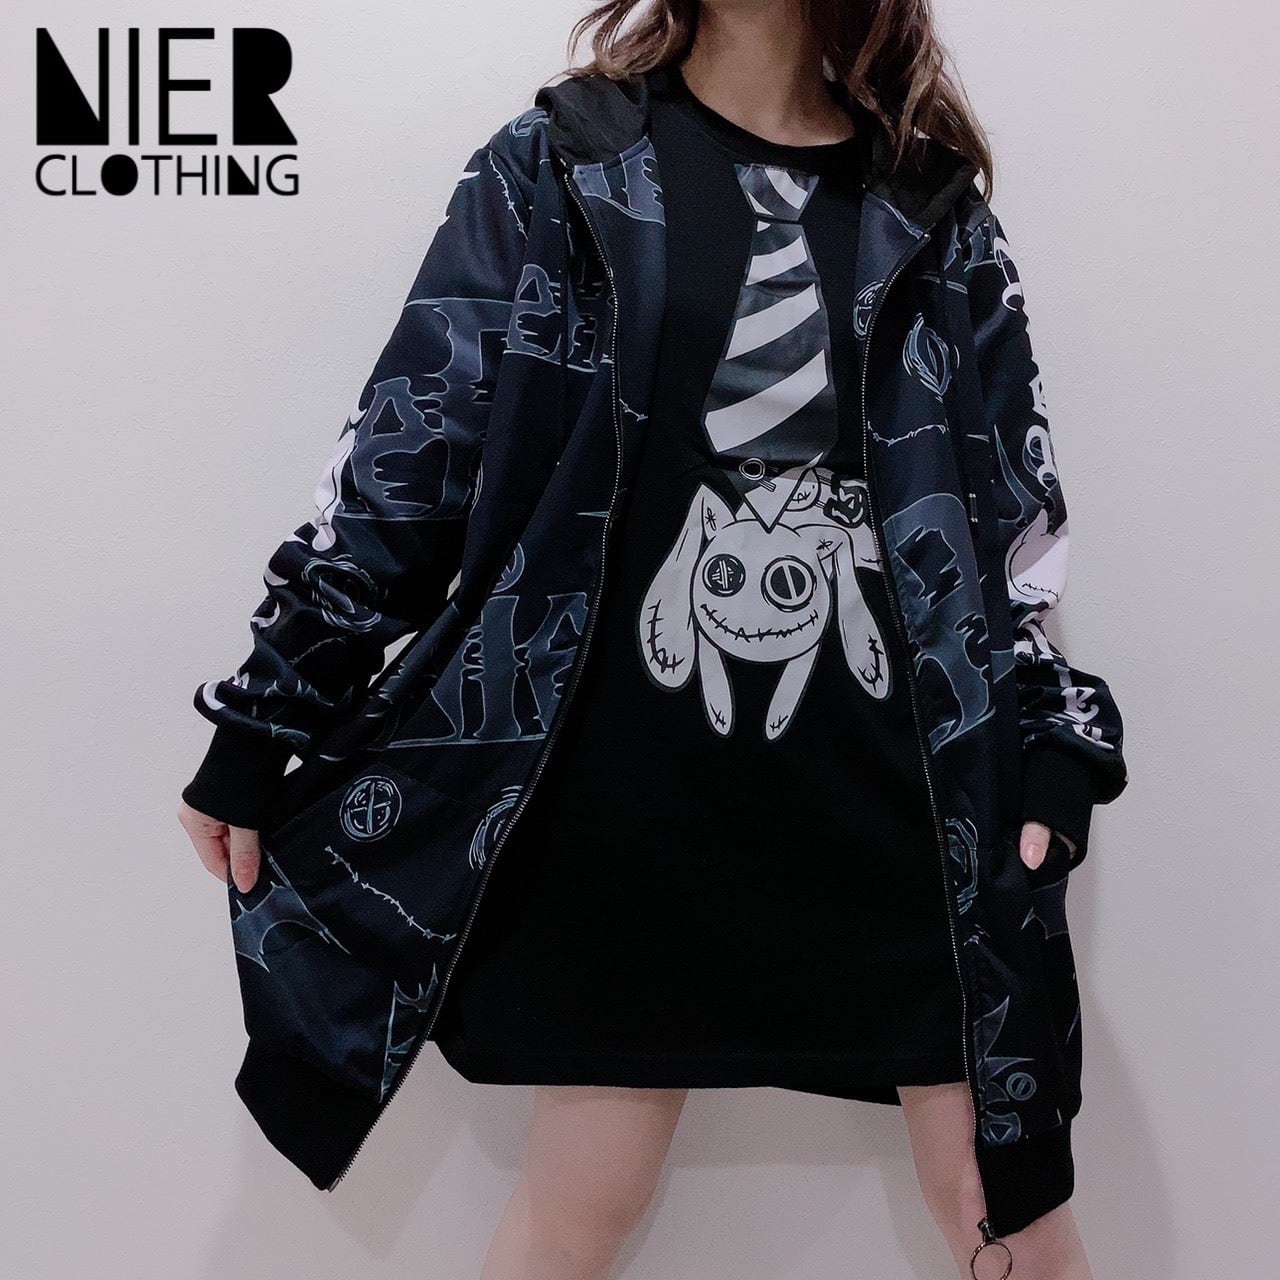 DARK BLACK ZIP OUTER | NIER CLOTHING powered by BASE